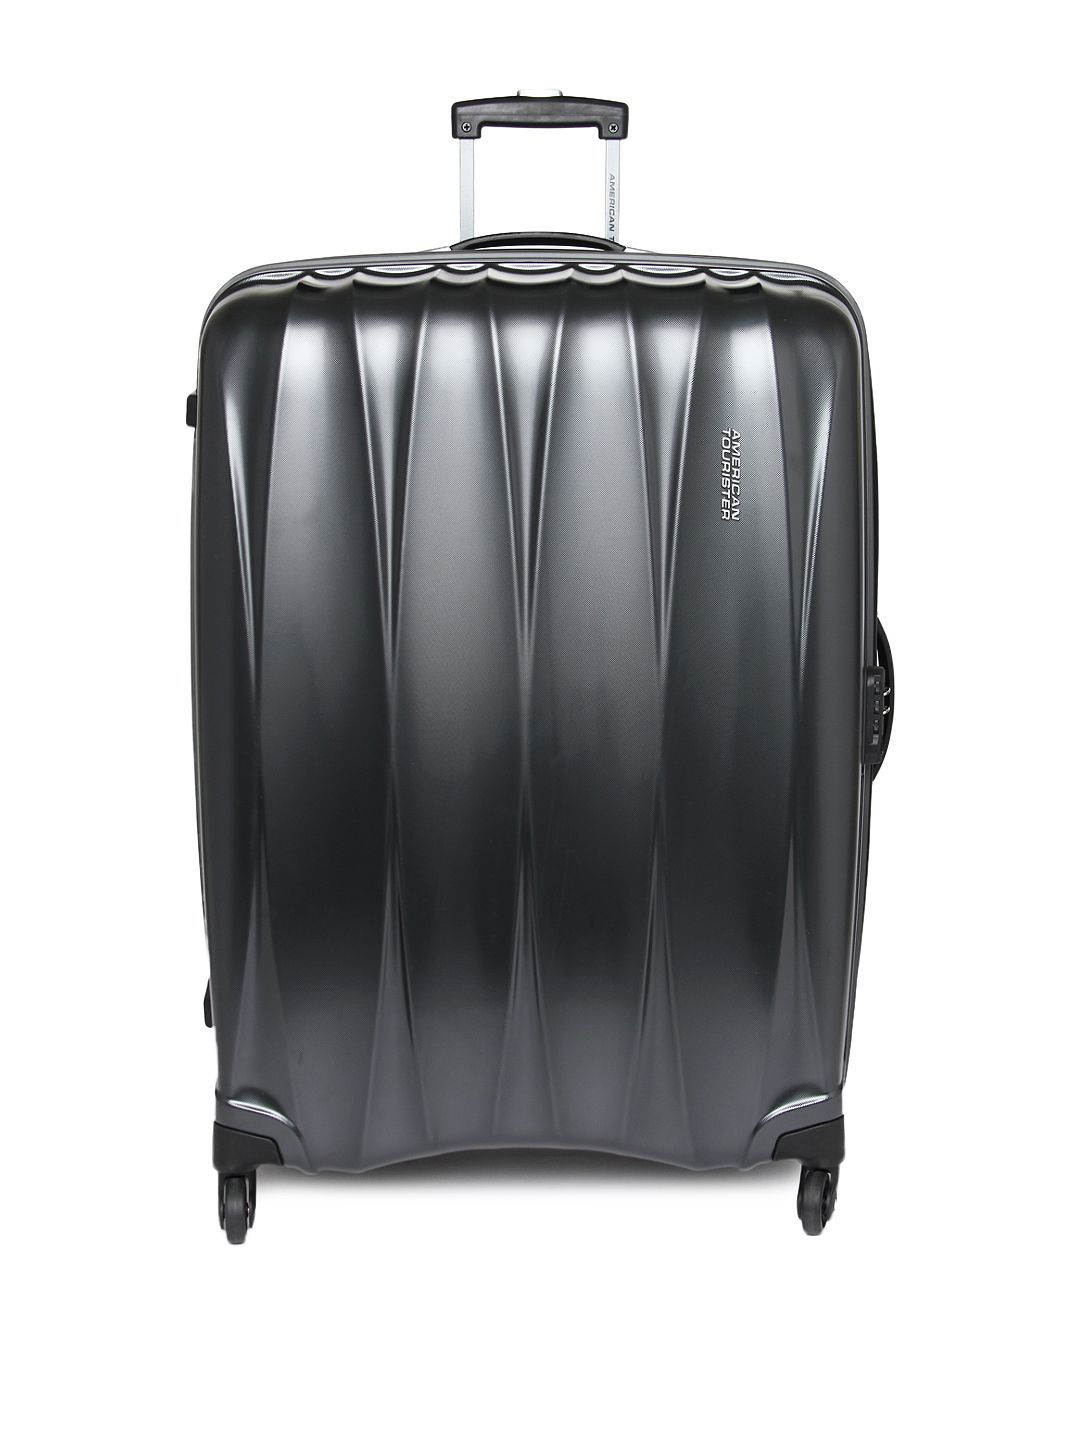 AMERICAN TOURISTER Unisex Gunmetal-Toned Arona Large Trolley Suitcase Price in India